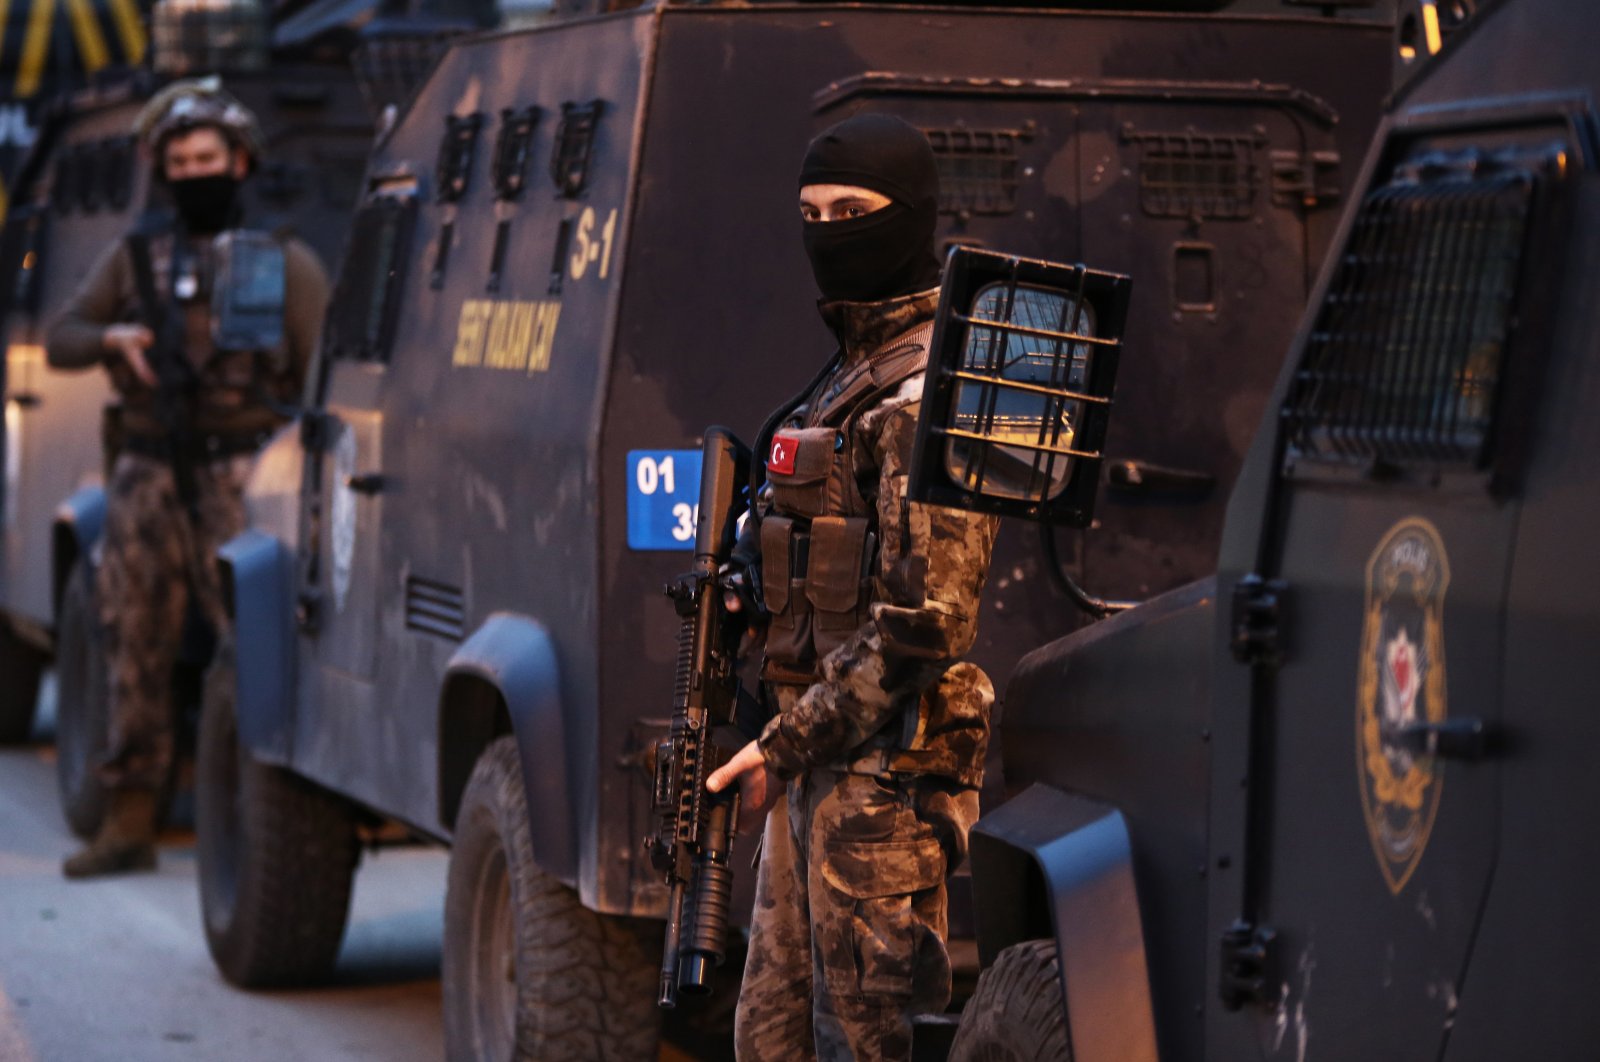 Turkish counterterrorism police carry out raids in Adana province on March 17, 2020 (Sabah File Photo)